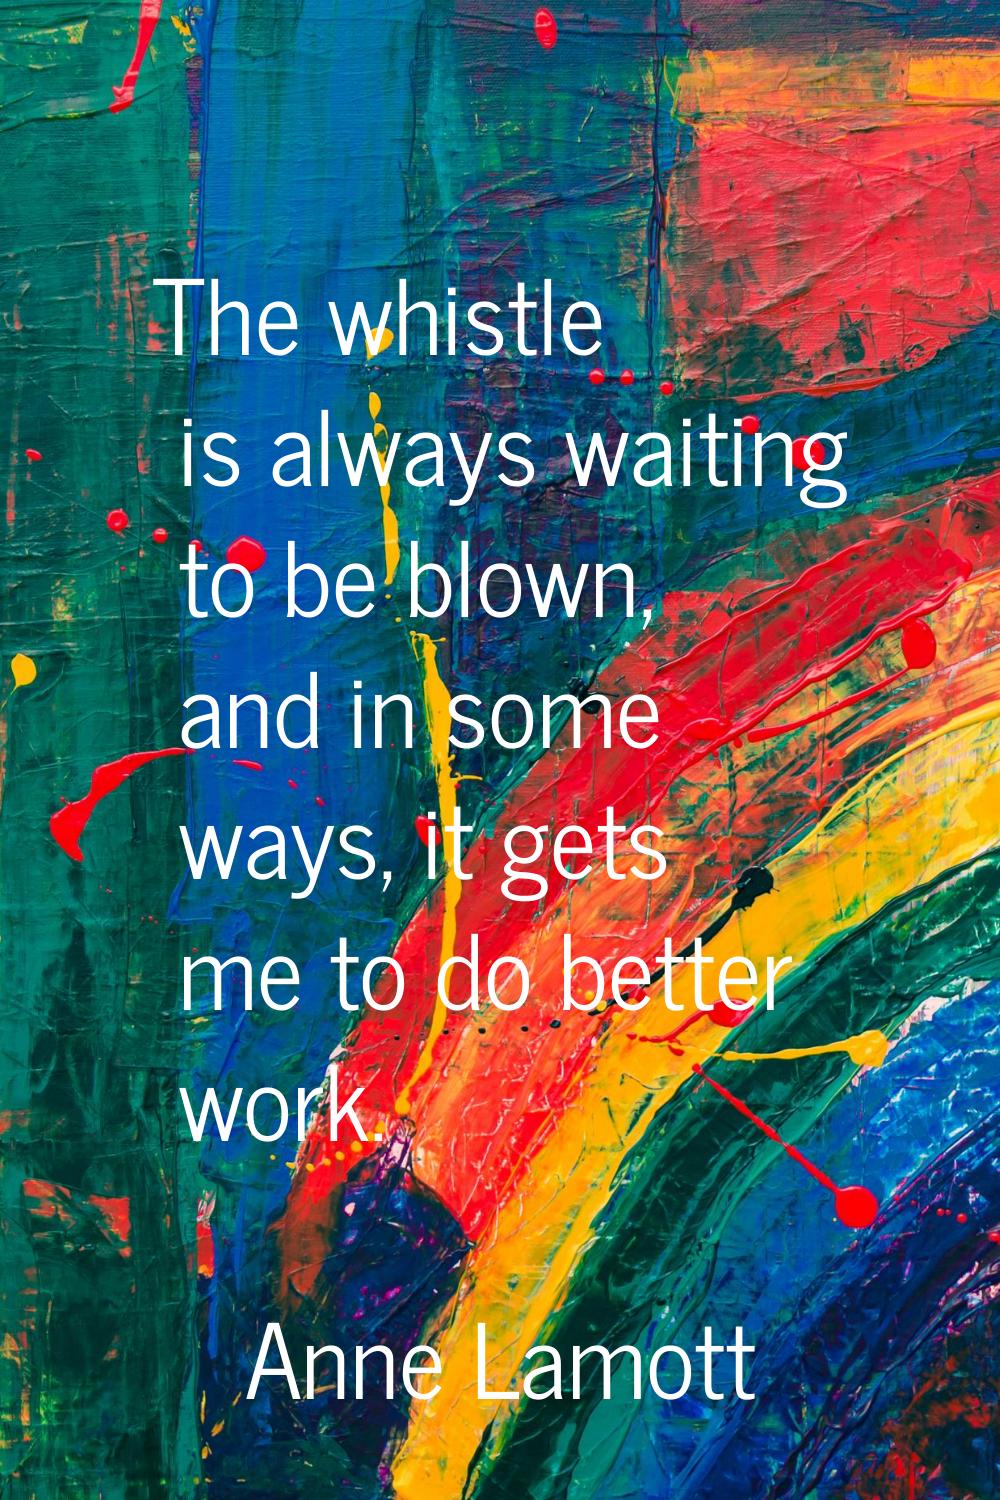 The whistle is always waiting to be blown, and in some ways, it gets me to do better work.